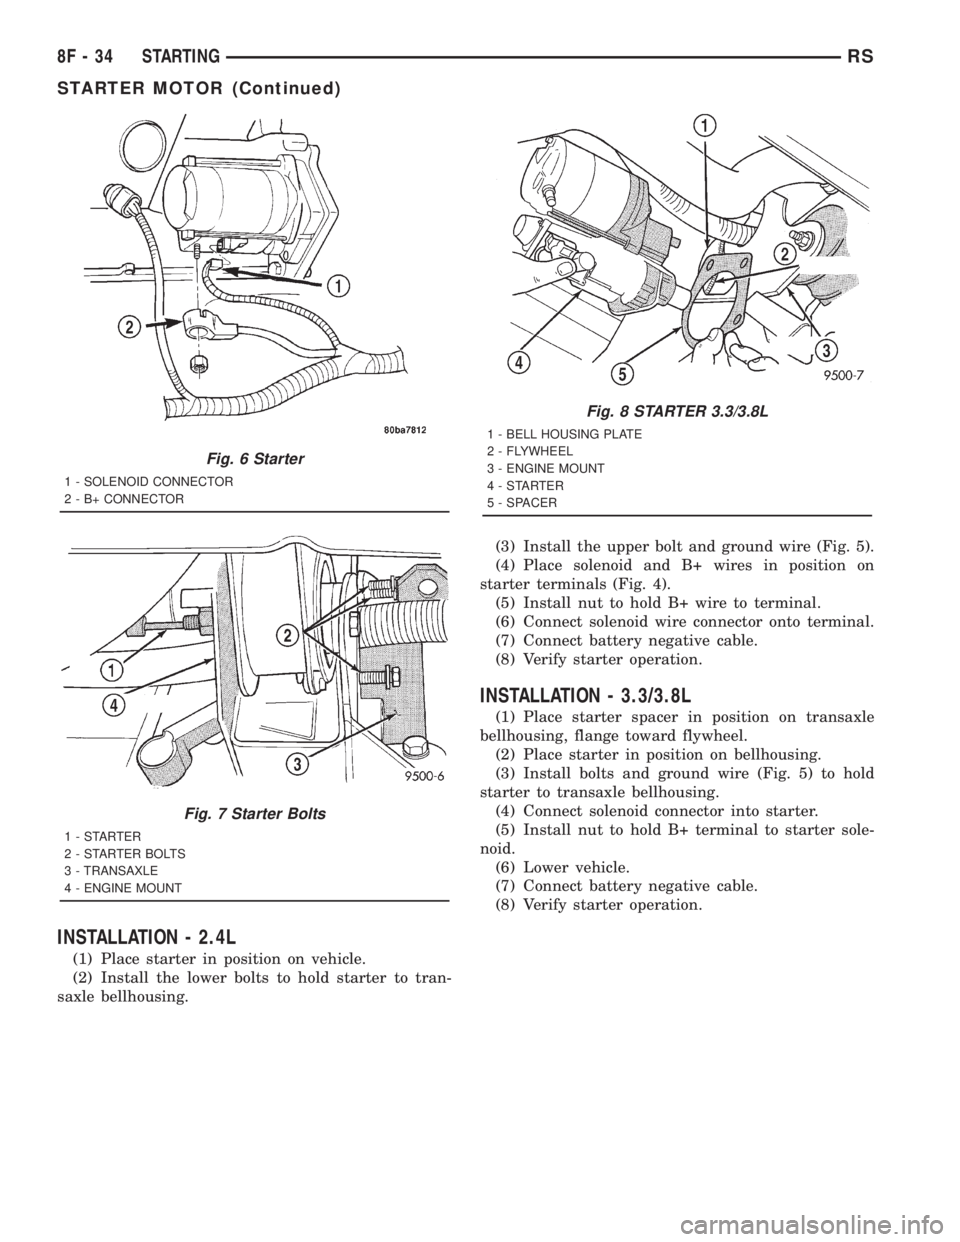 CHRYSLER VOYAGER 2001  Service Manual INSTALLATION - 2.4L
(1) Place starter in position on vehicle.
(2) Install the lower bolts to hold starter to tran-
saxle bellhousing.(3) Install the upper bolt and ground wire (Fig. 5).
(4) Place sole